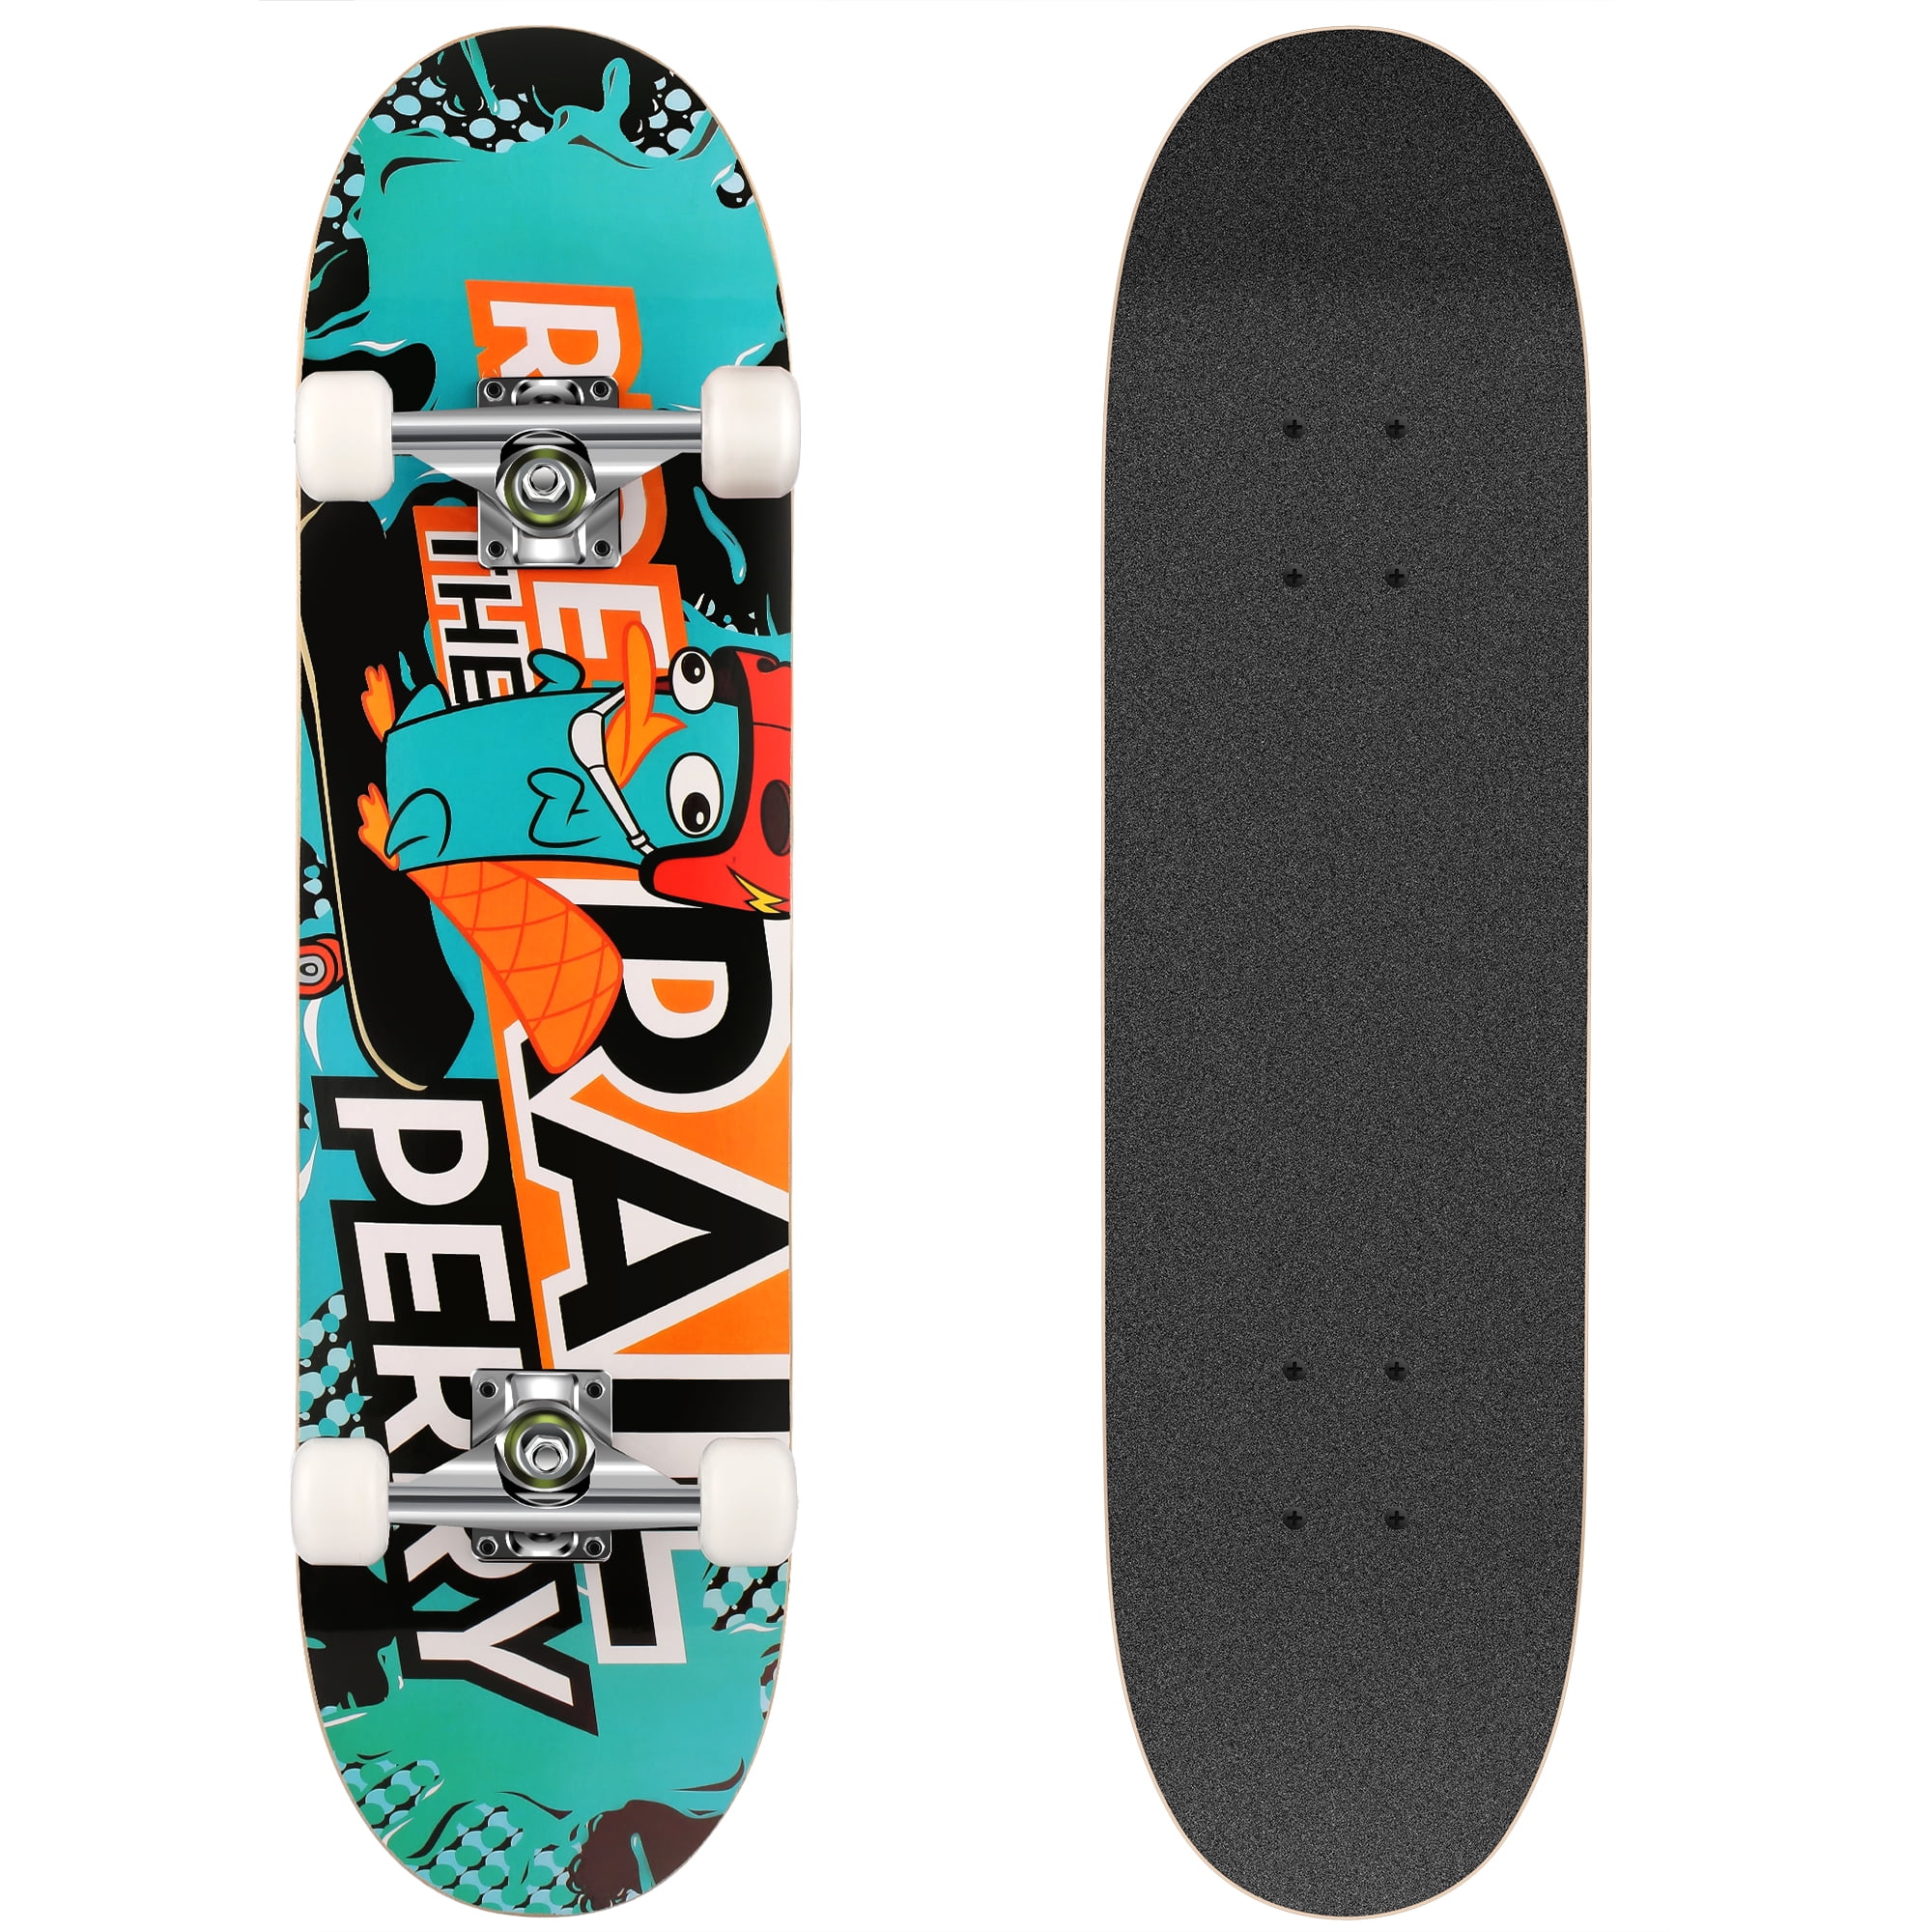 NEW SKATEBOARD Complete 31 X 8.0